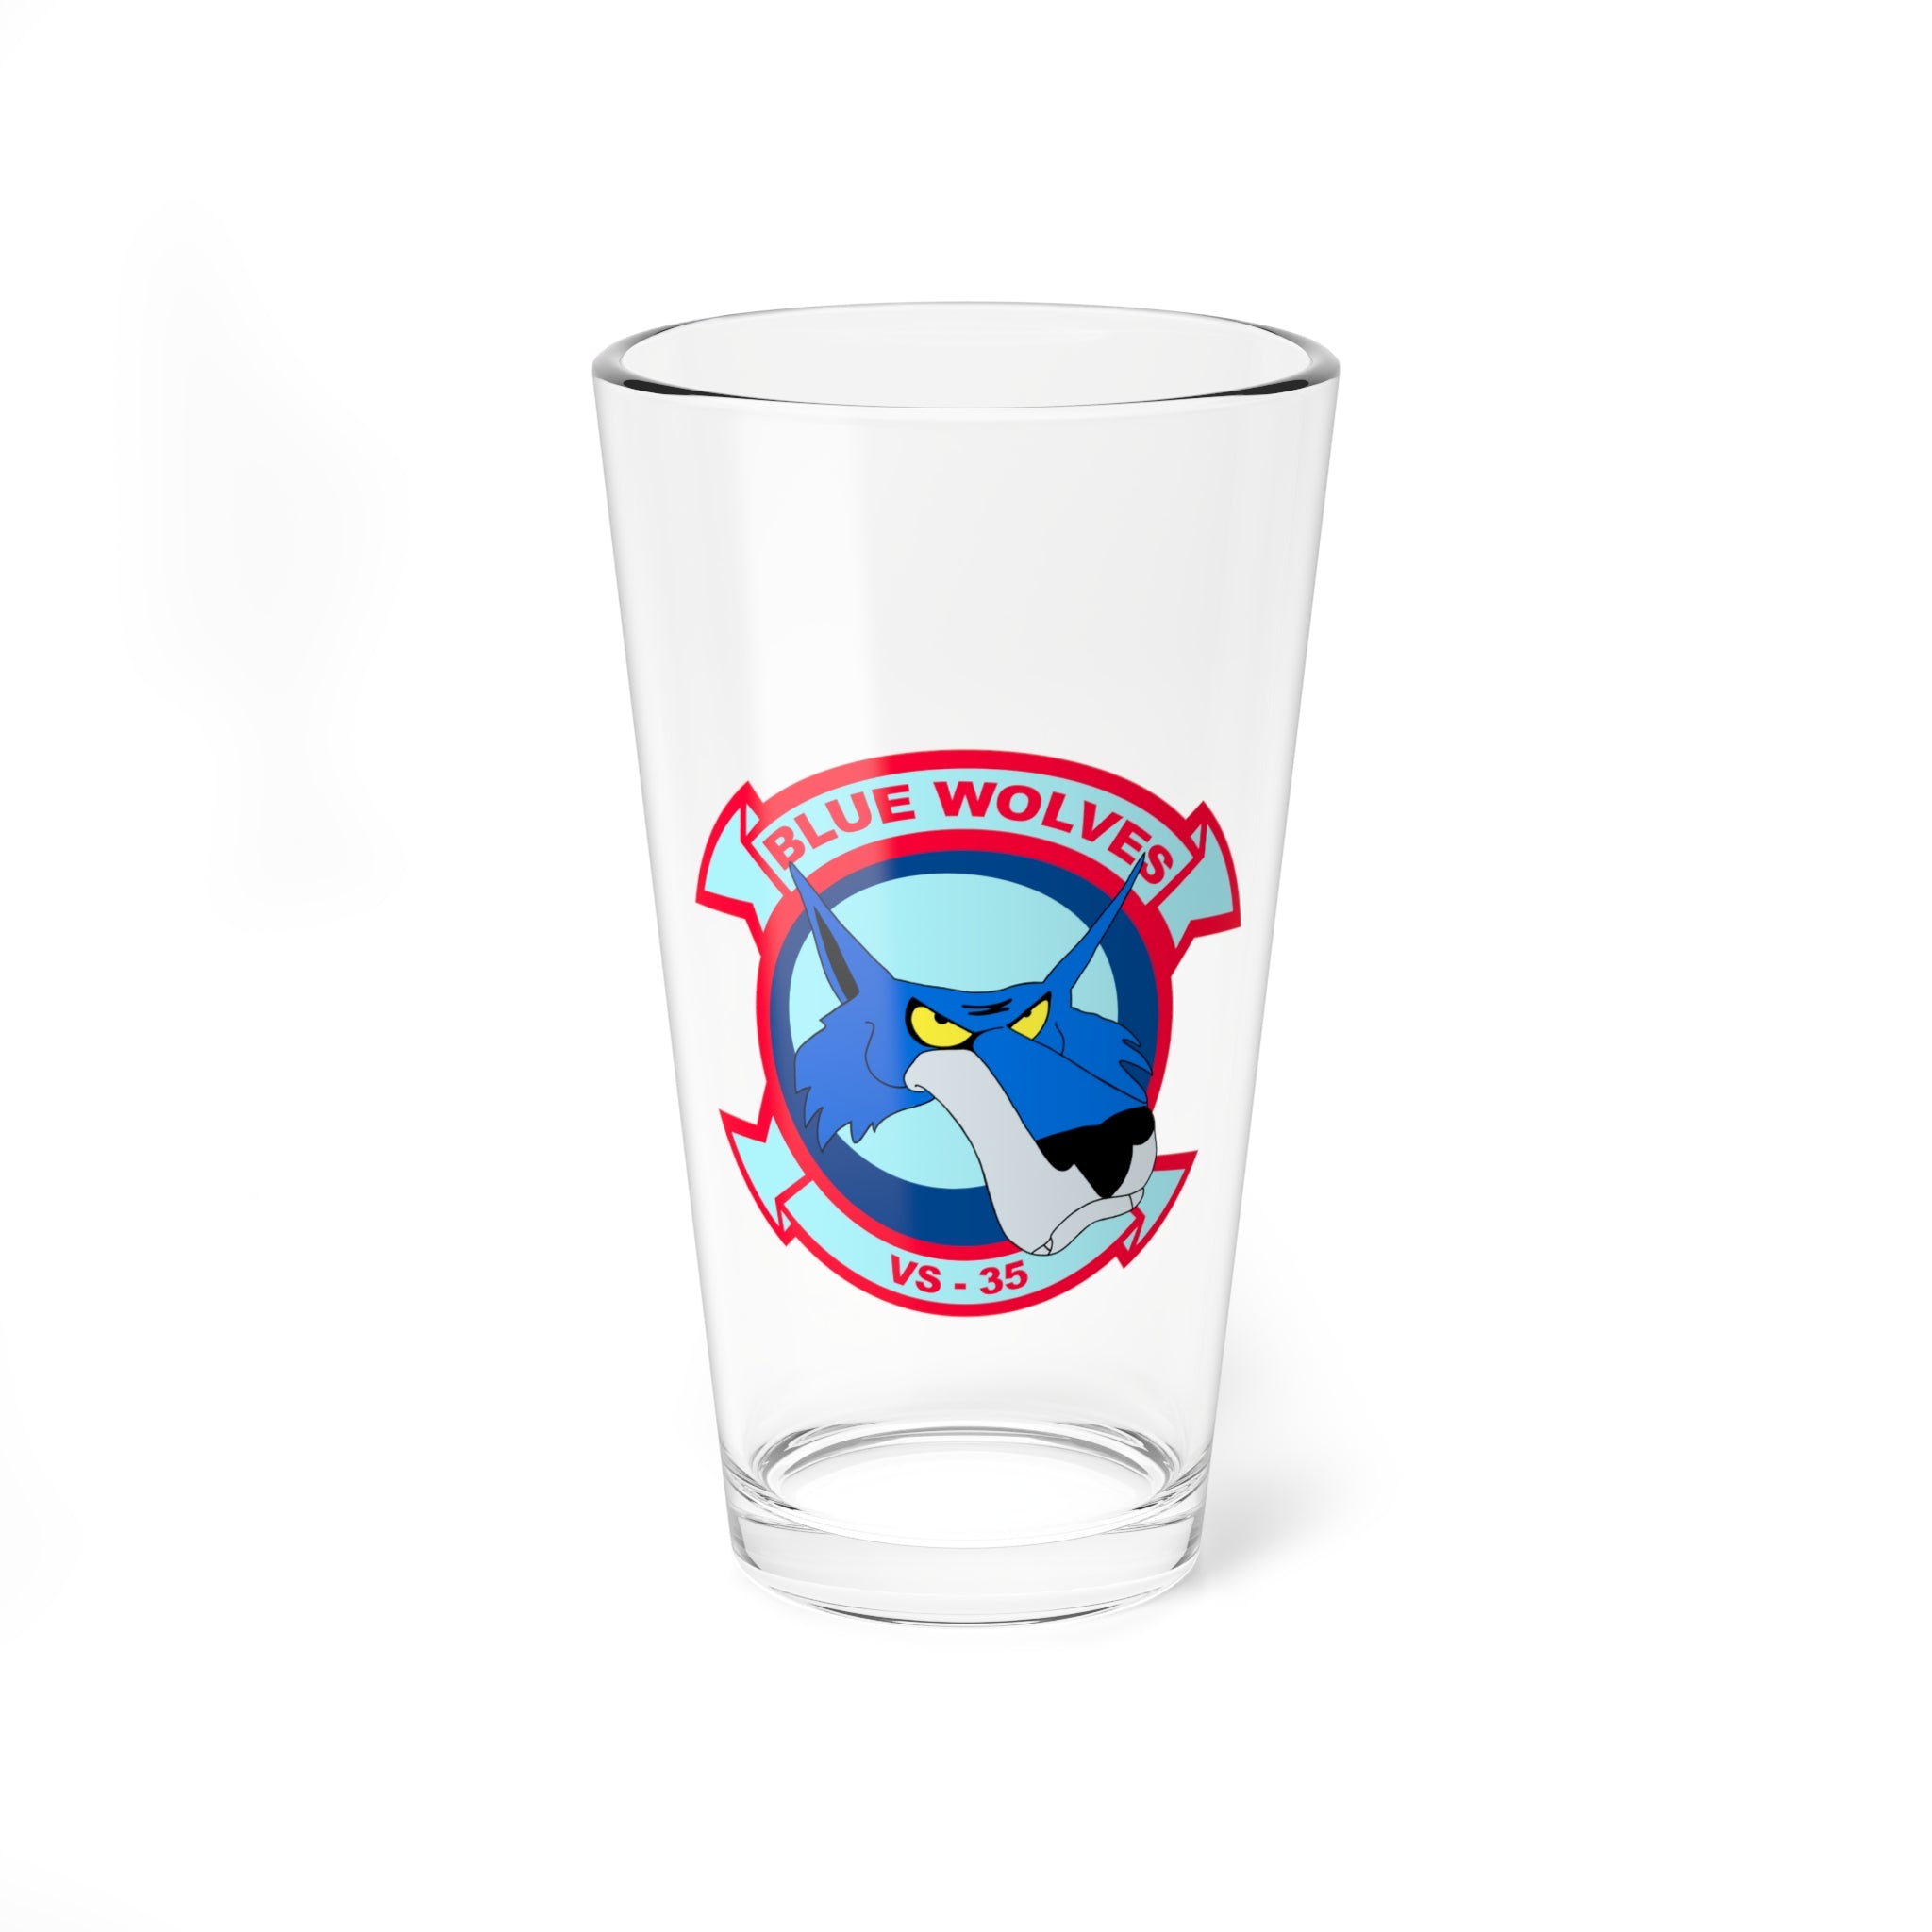 VS-35 "Blue Wolves Pint Glass US Navy Sea Control Squadron flying the S-3 Viking for retired and veteran Sailors.